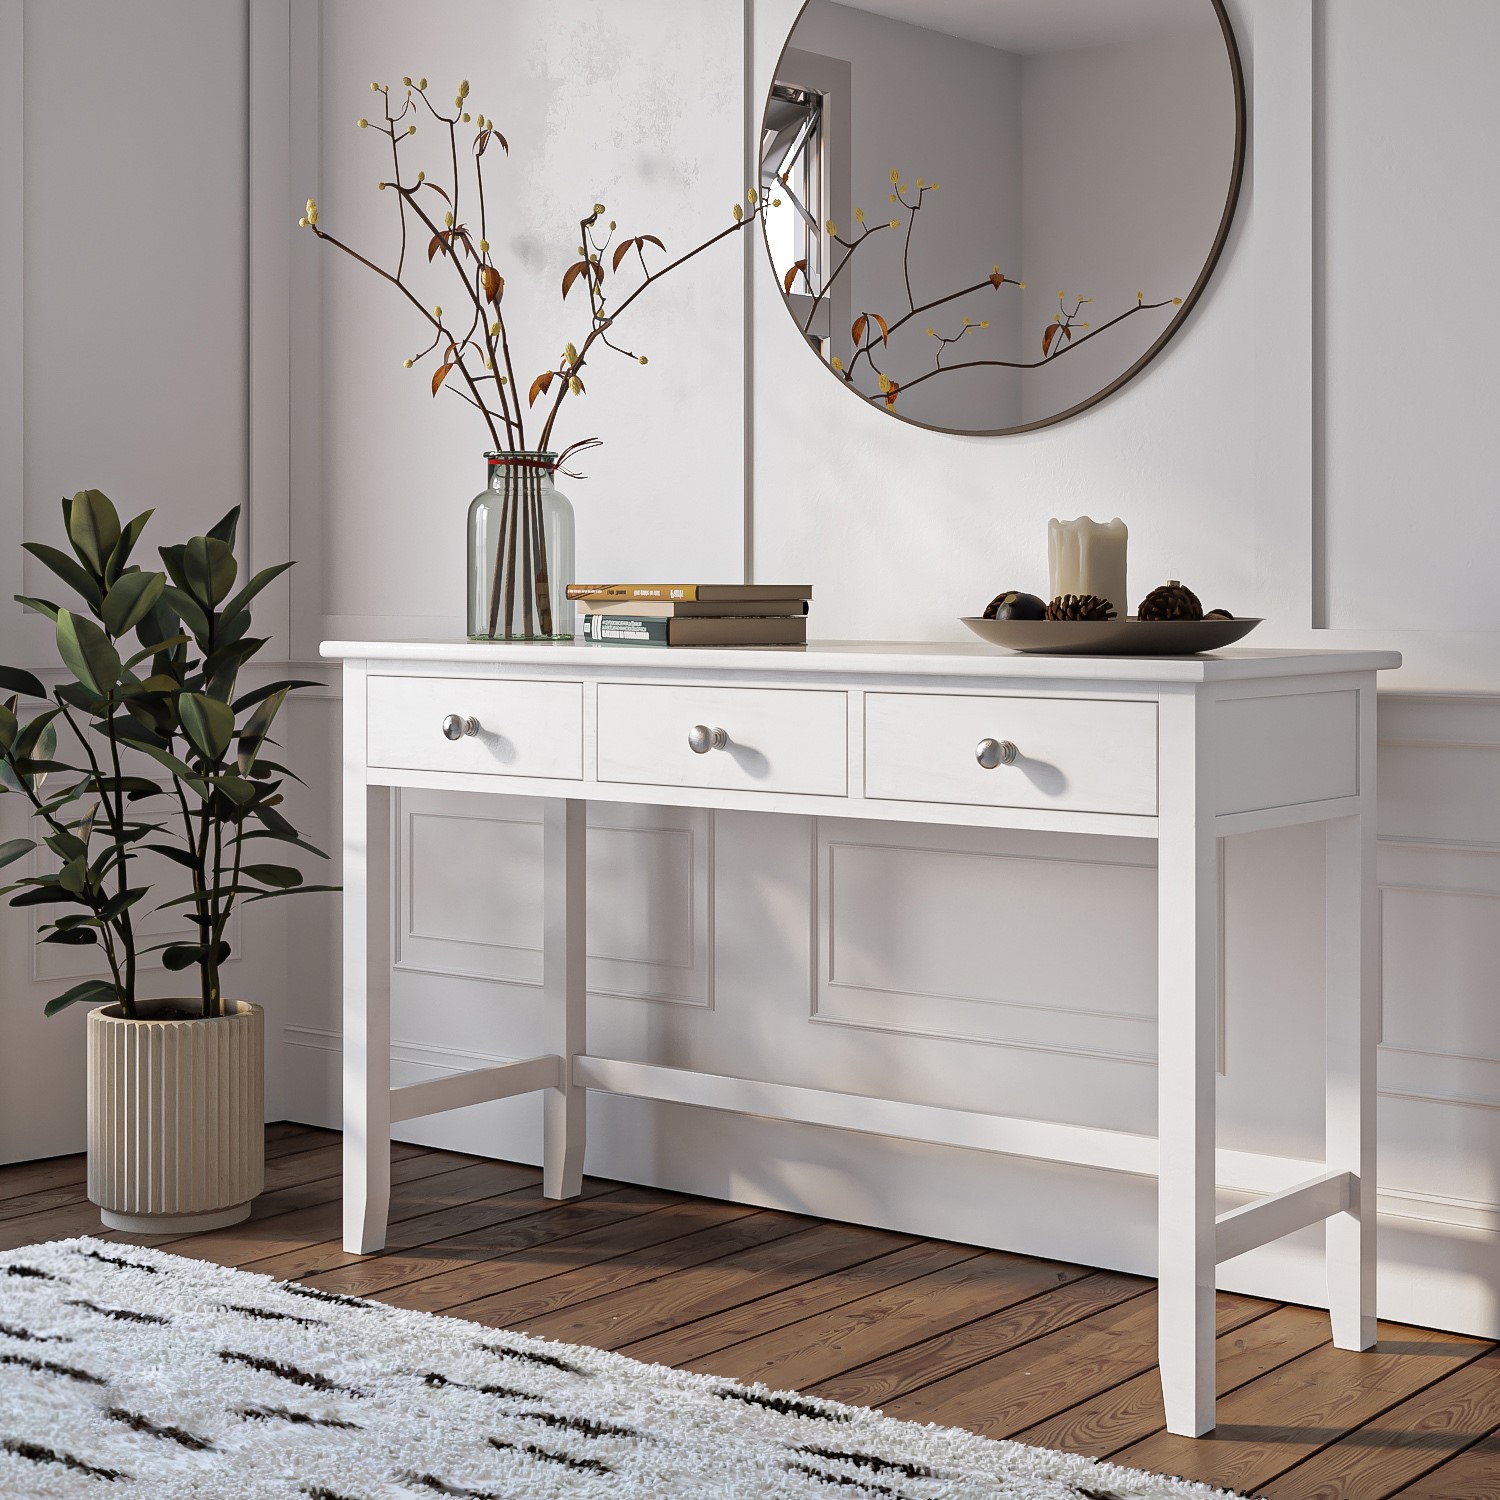 Photo of White painted dressing table with 3 drawers - harper